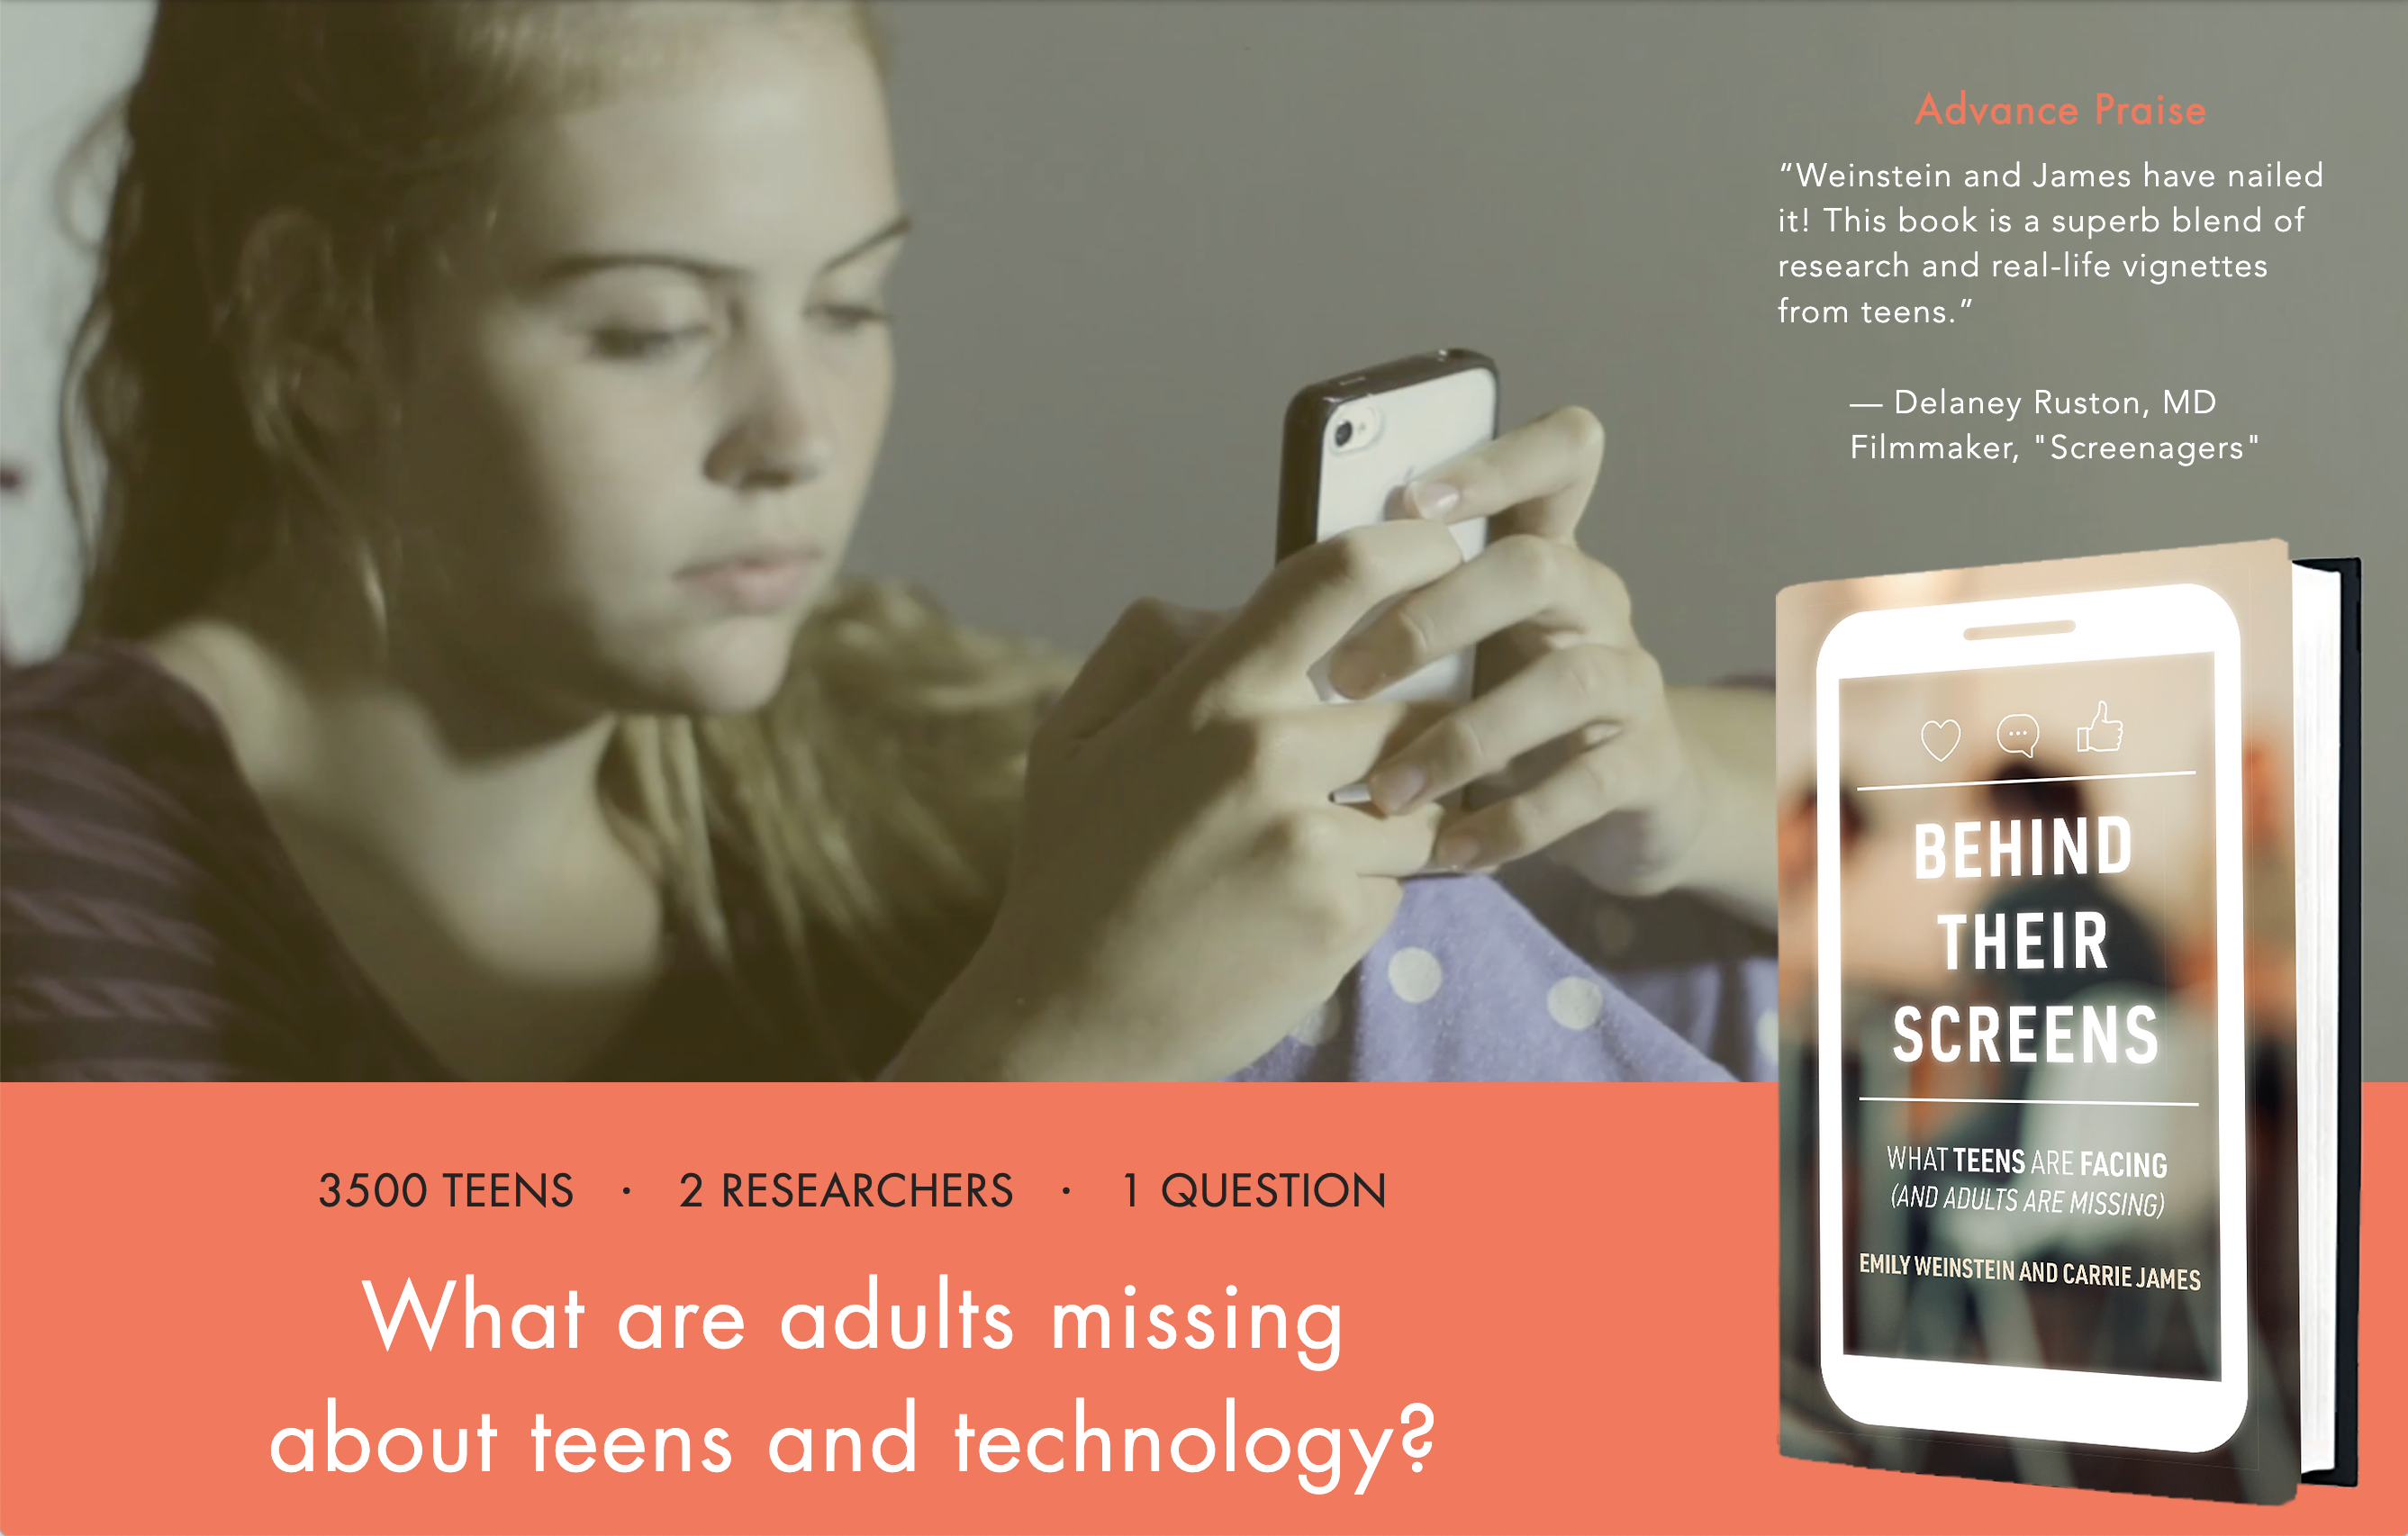 Teens and technology behind their screens emily weinstein